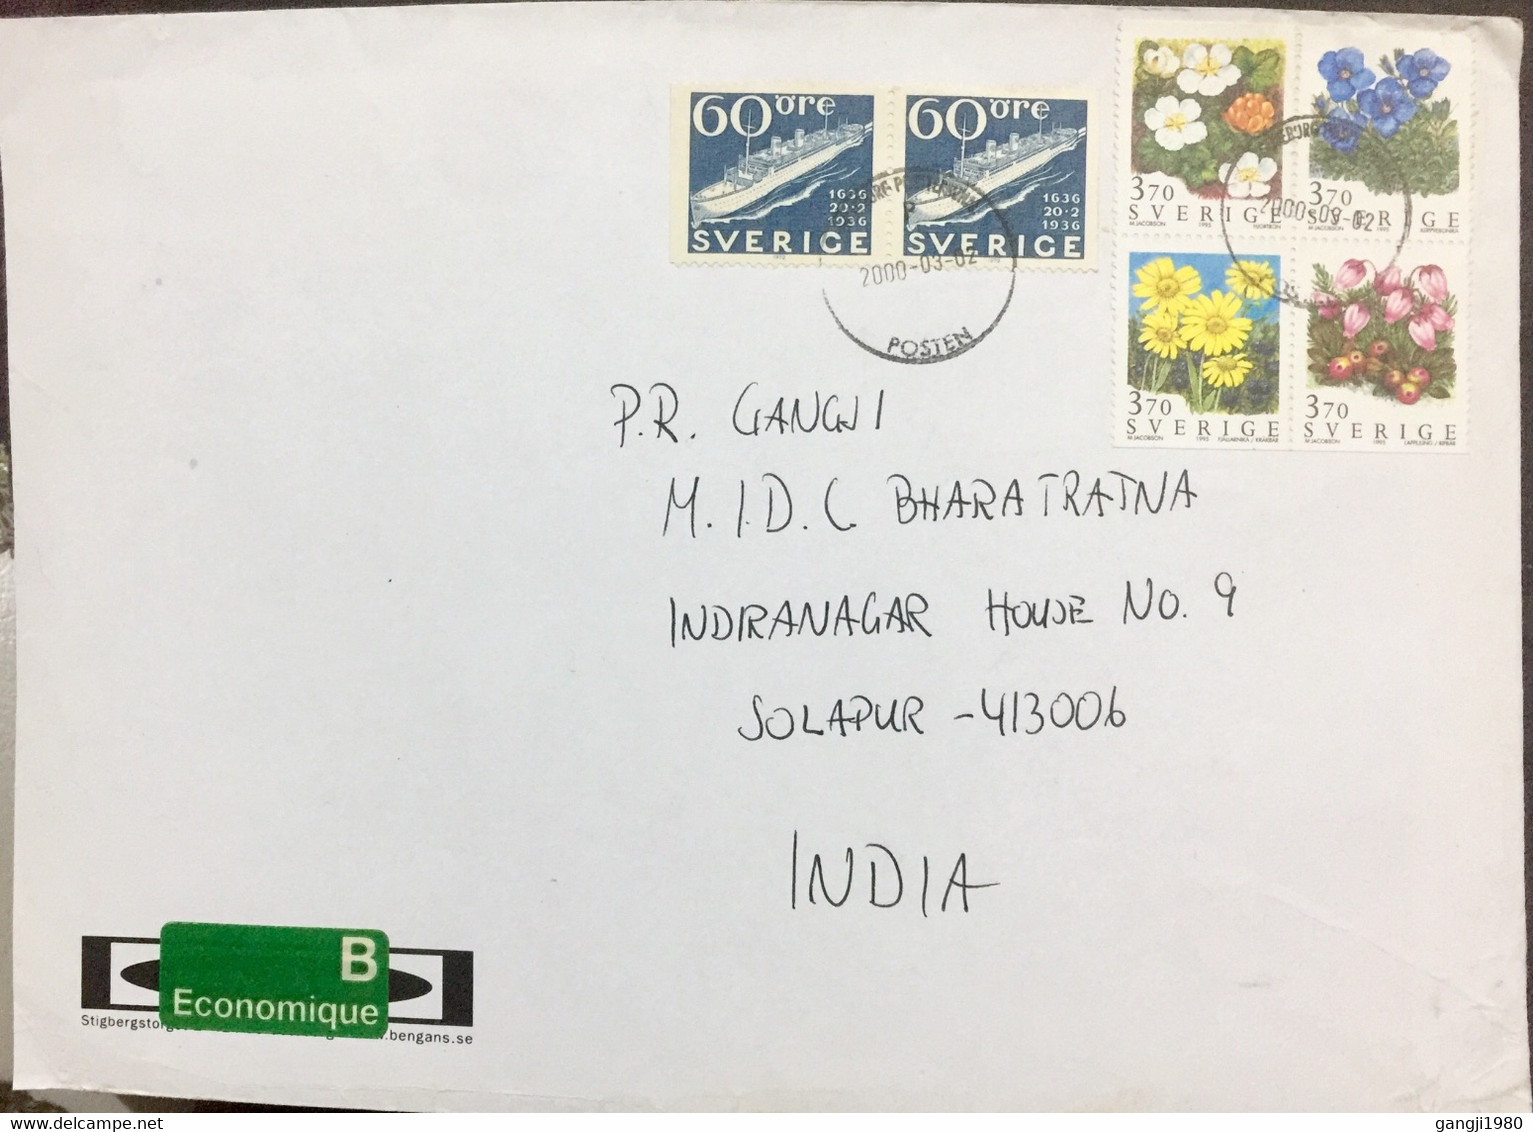 SWEDEN 2000, COVER VIGNETTE ECONOMIQUE GREEN LABEL USED TO INDIA,STAMPS 4 STAMPS FLOWERS BLOCK,SHIP PAIR - Covers & Documents